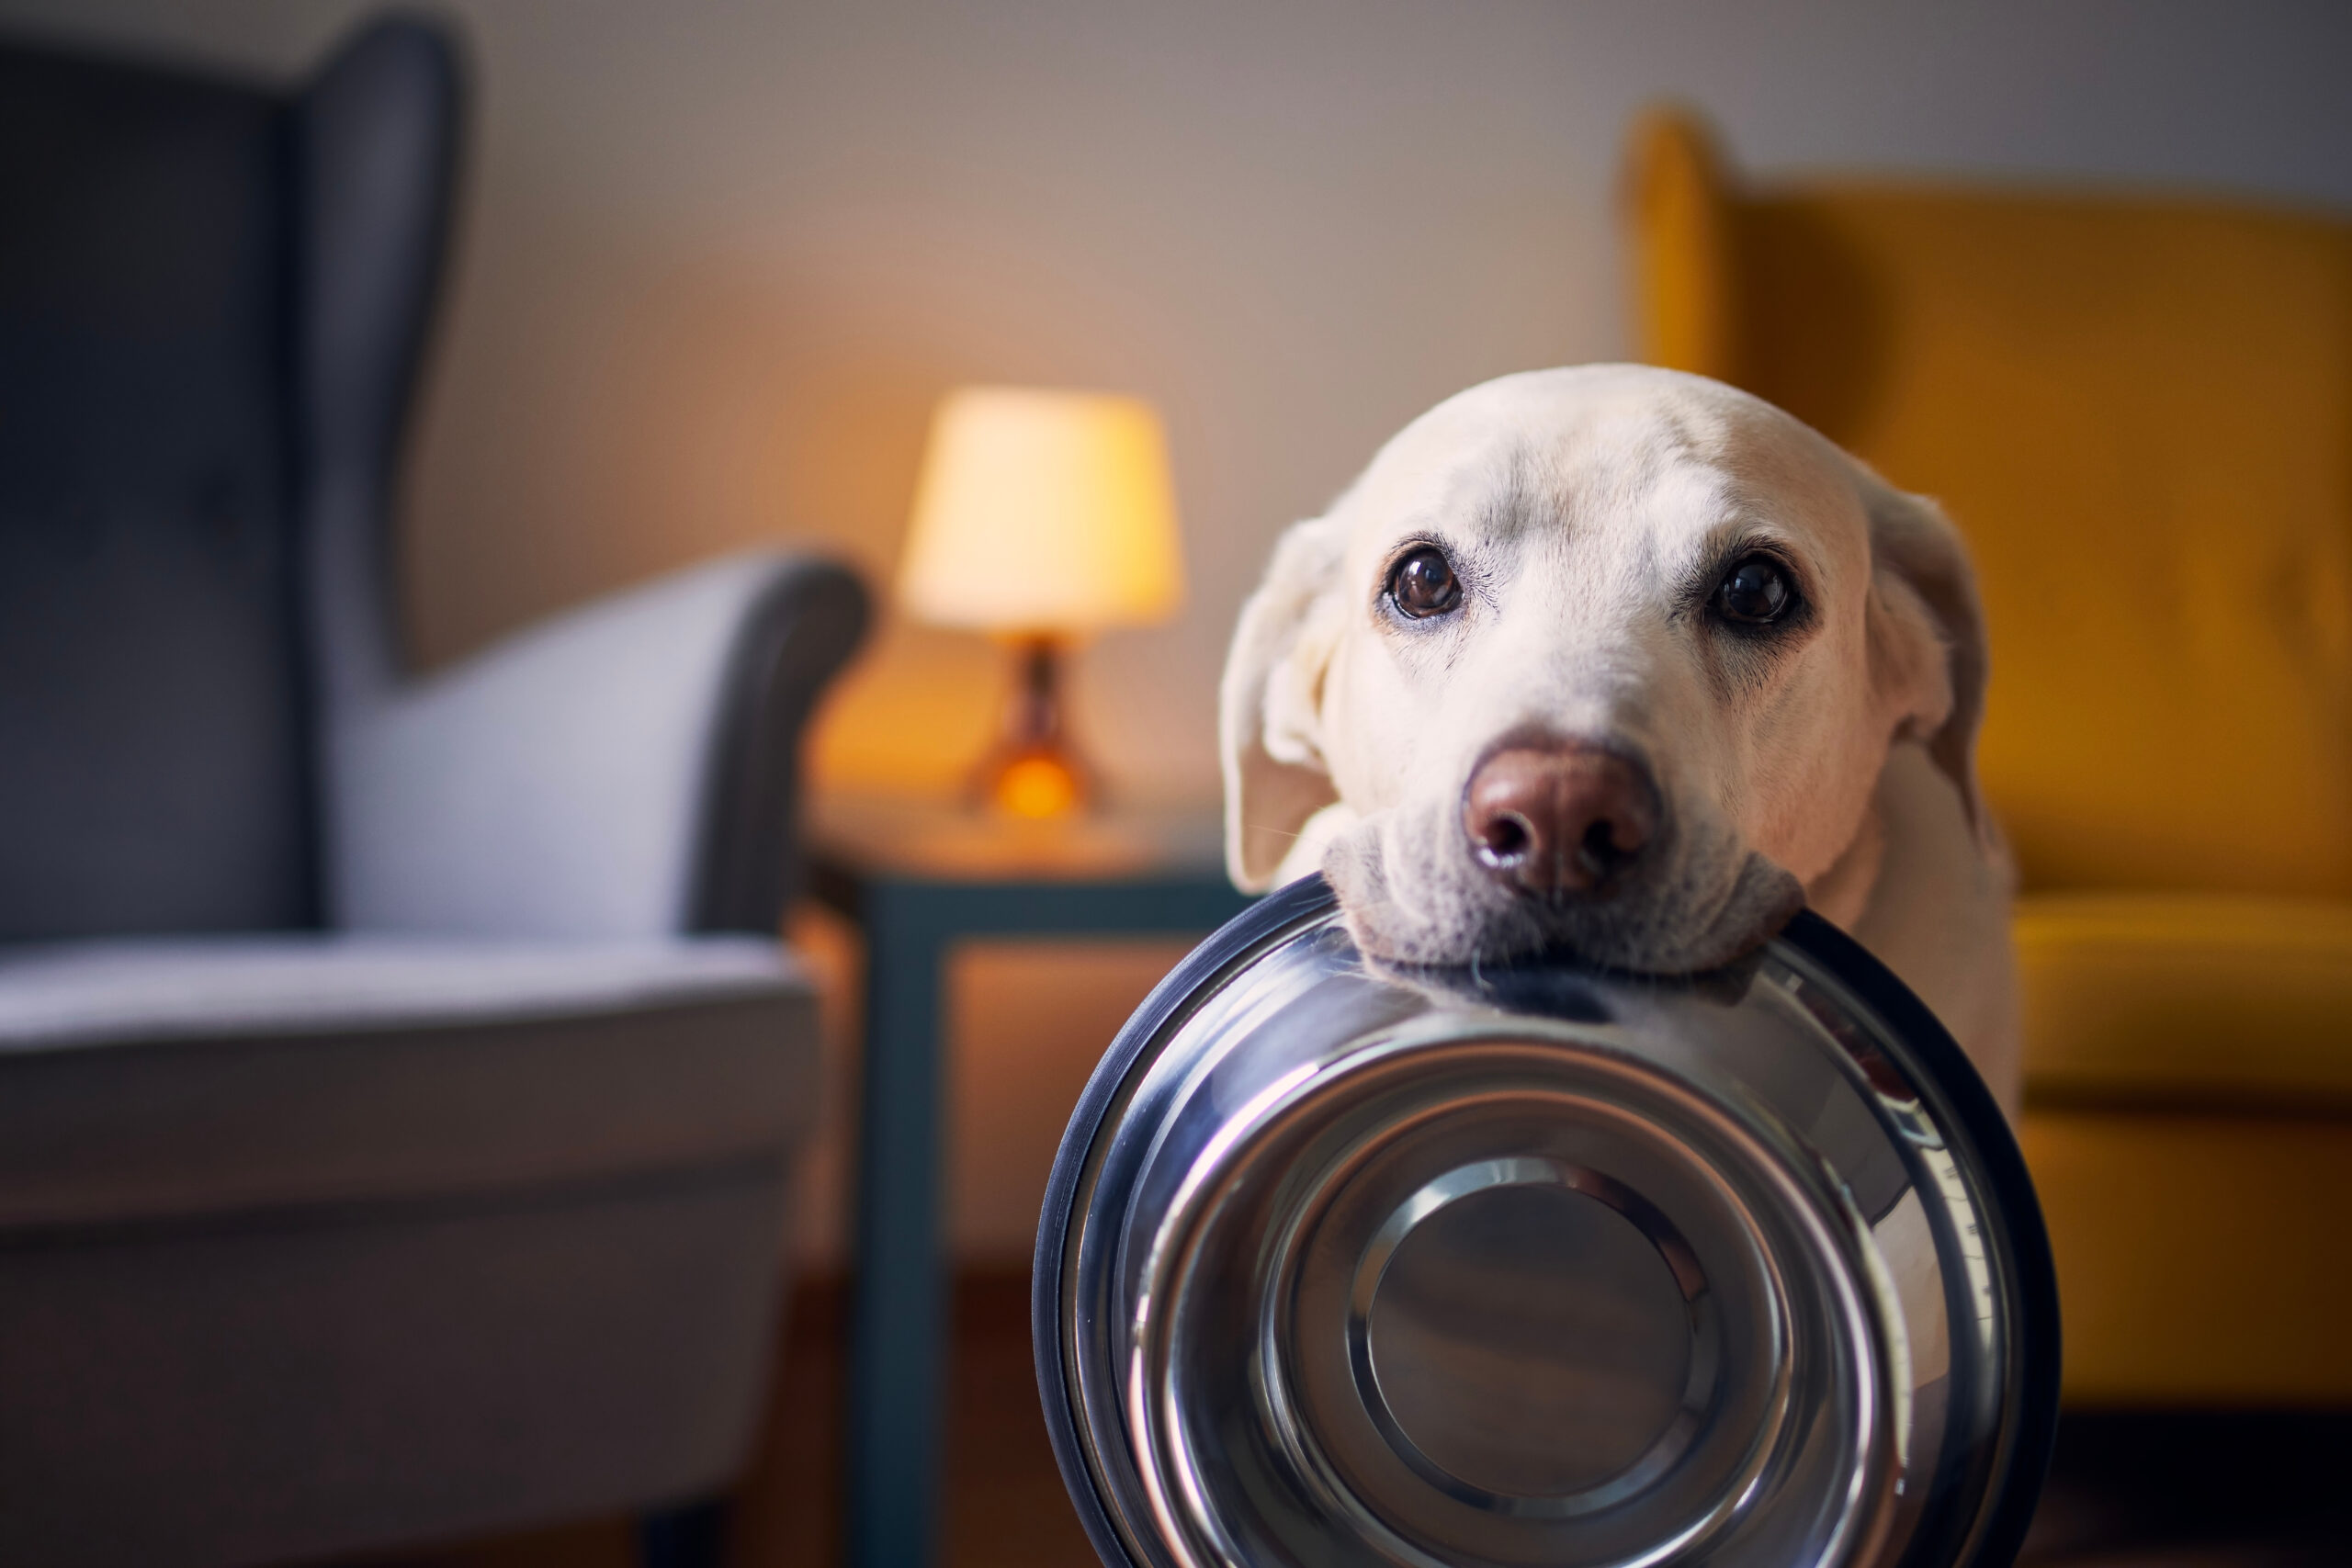 Do Pet Friendly Hotels Offer Special Menus For Pets?